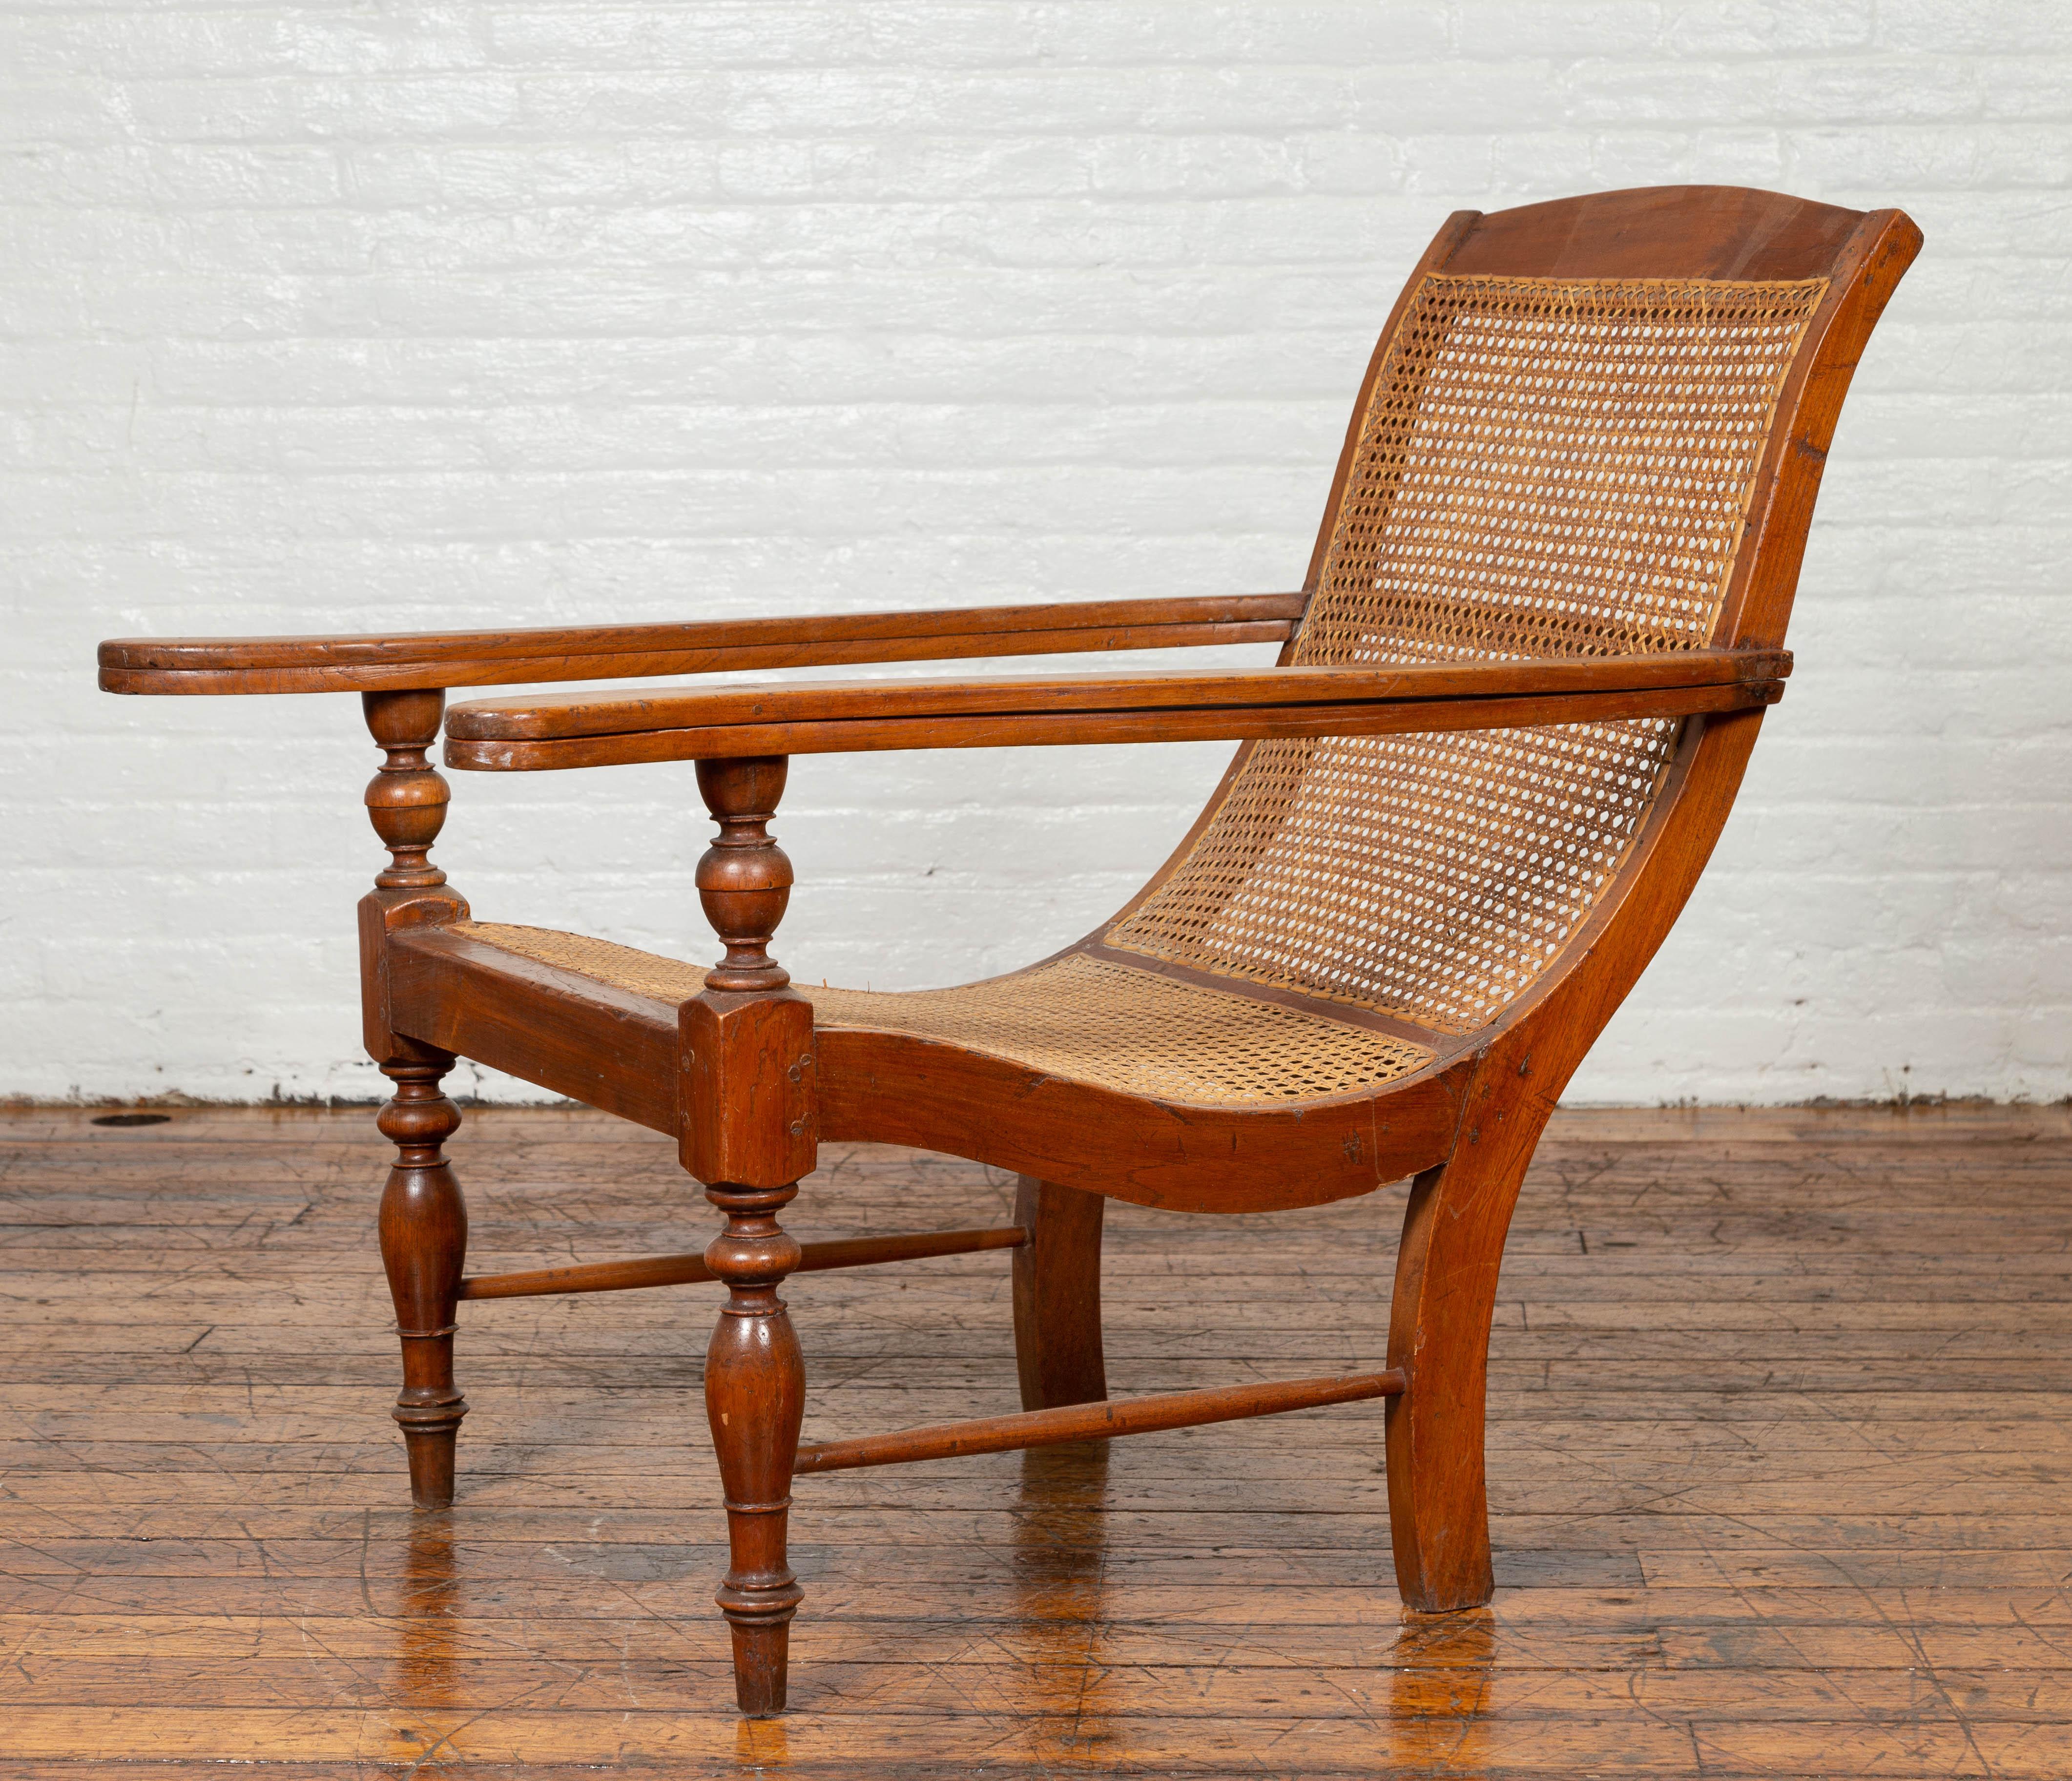 A vintage Dutch Colonial Indonesian teak wood plantation lounge chair from the mid-20th century, with rattan and extending arms. Designed to provide a relaxing experience to the sitter, this Dutch Colonial lounge chair features a nicely curving body